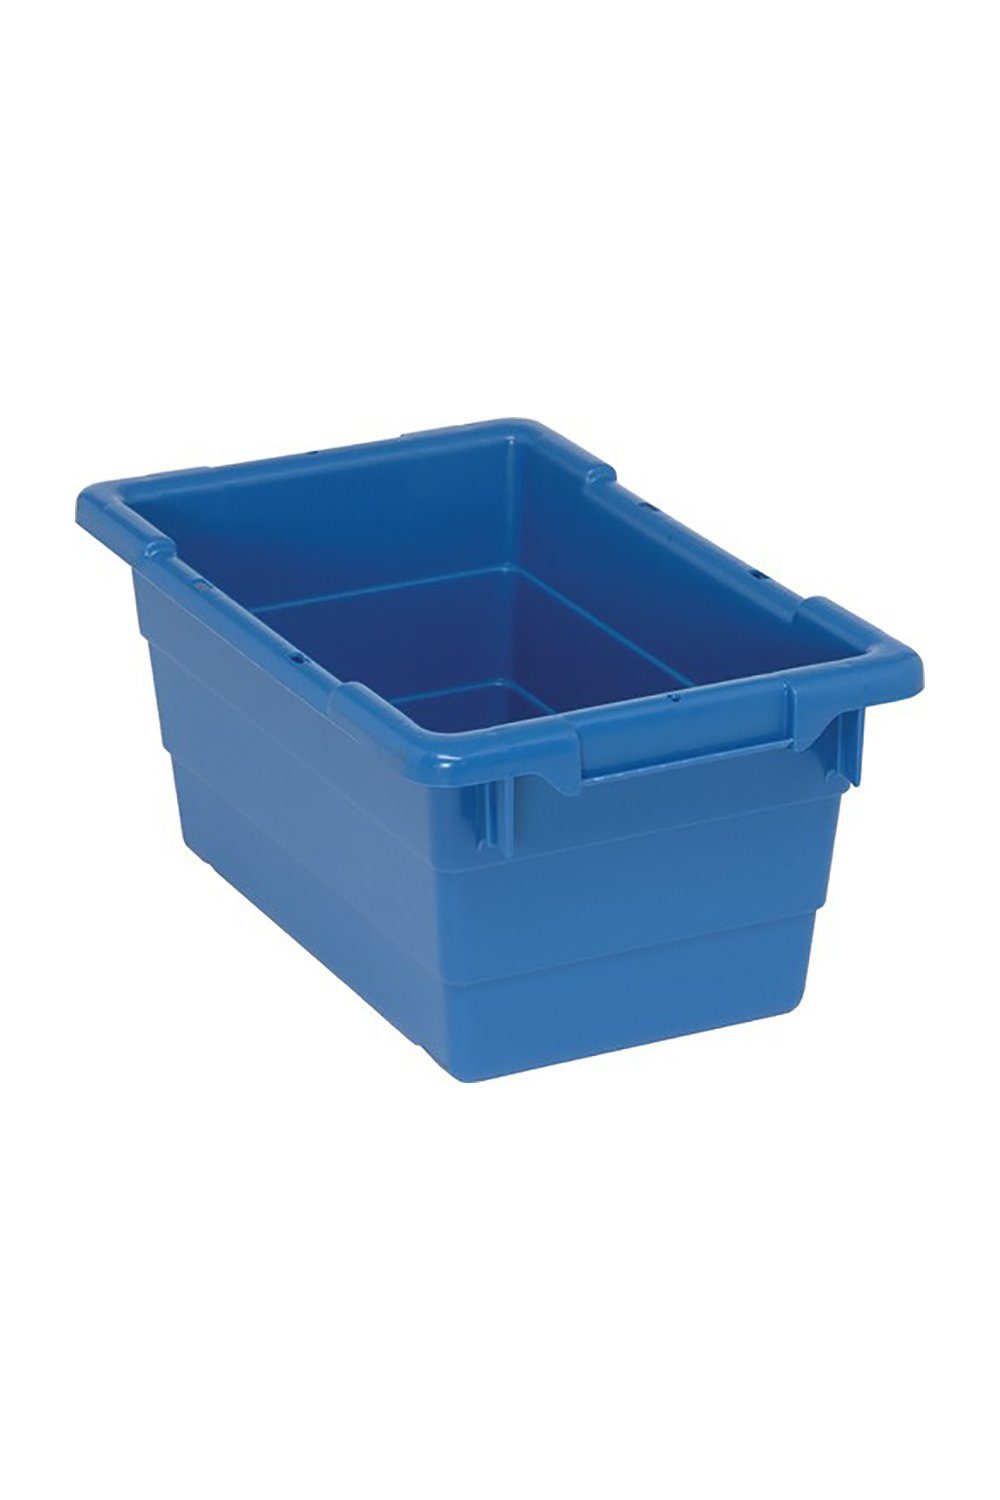 Cross Stack Tub Bins & Containers Acart 